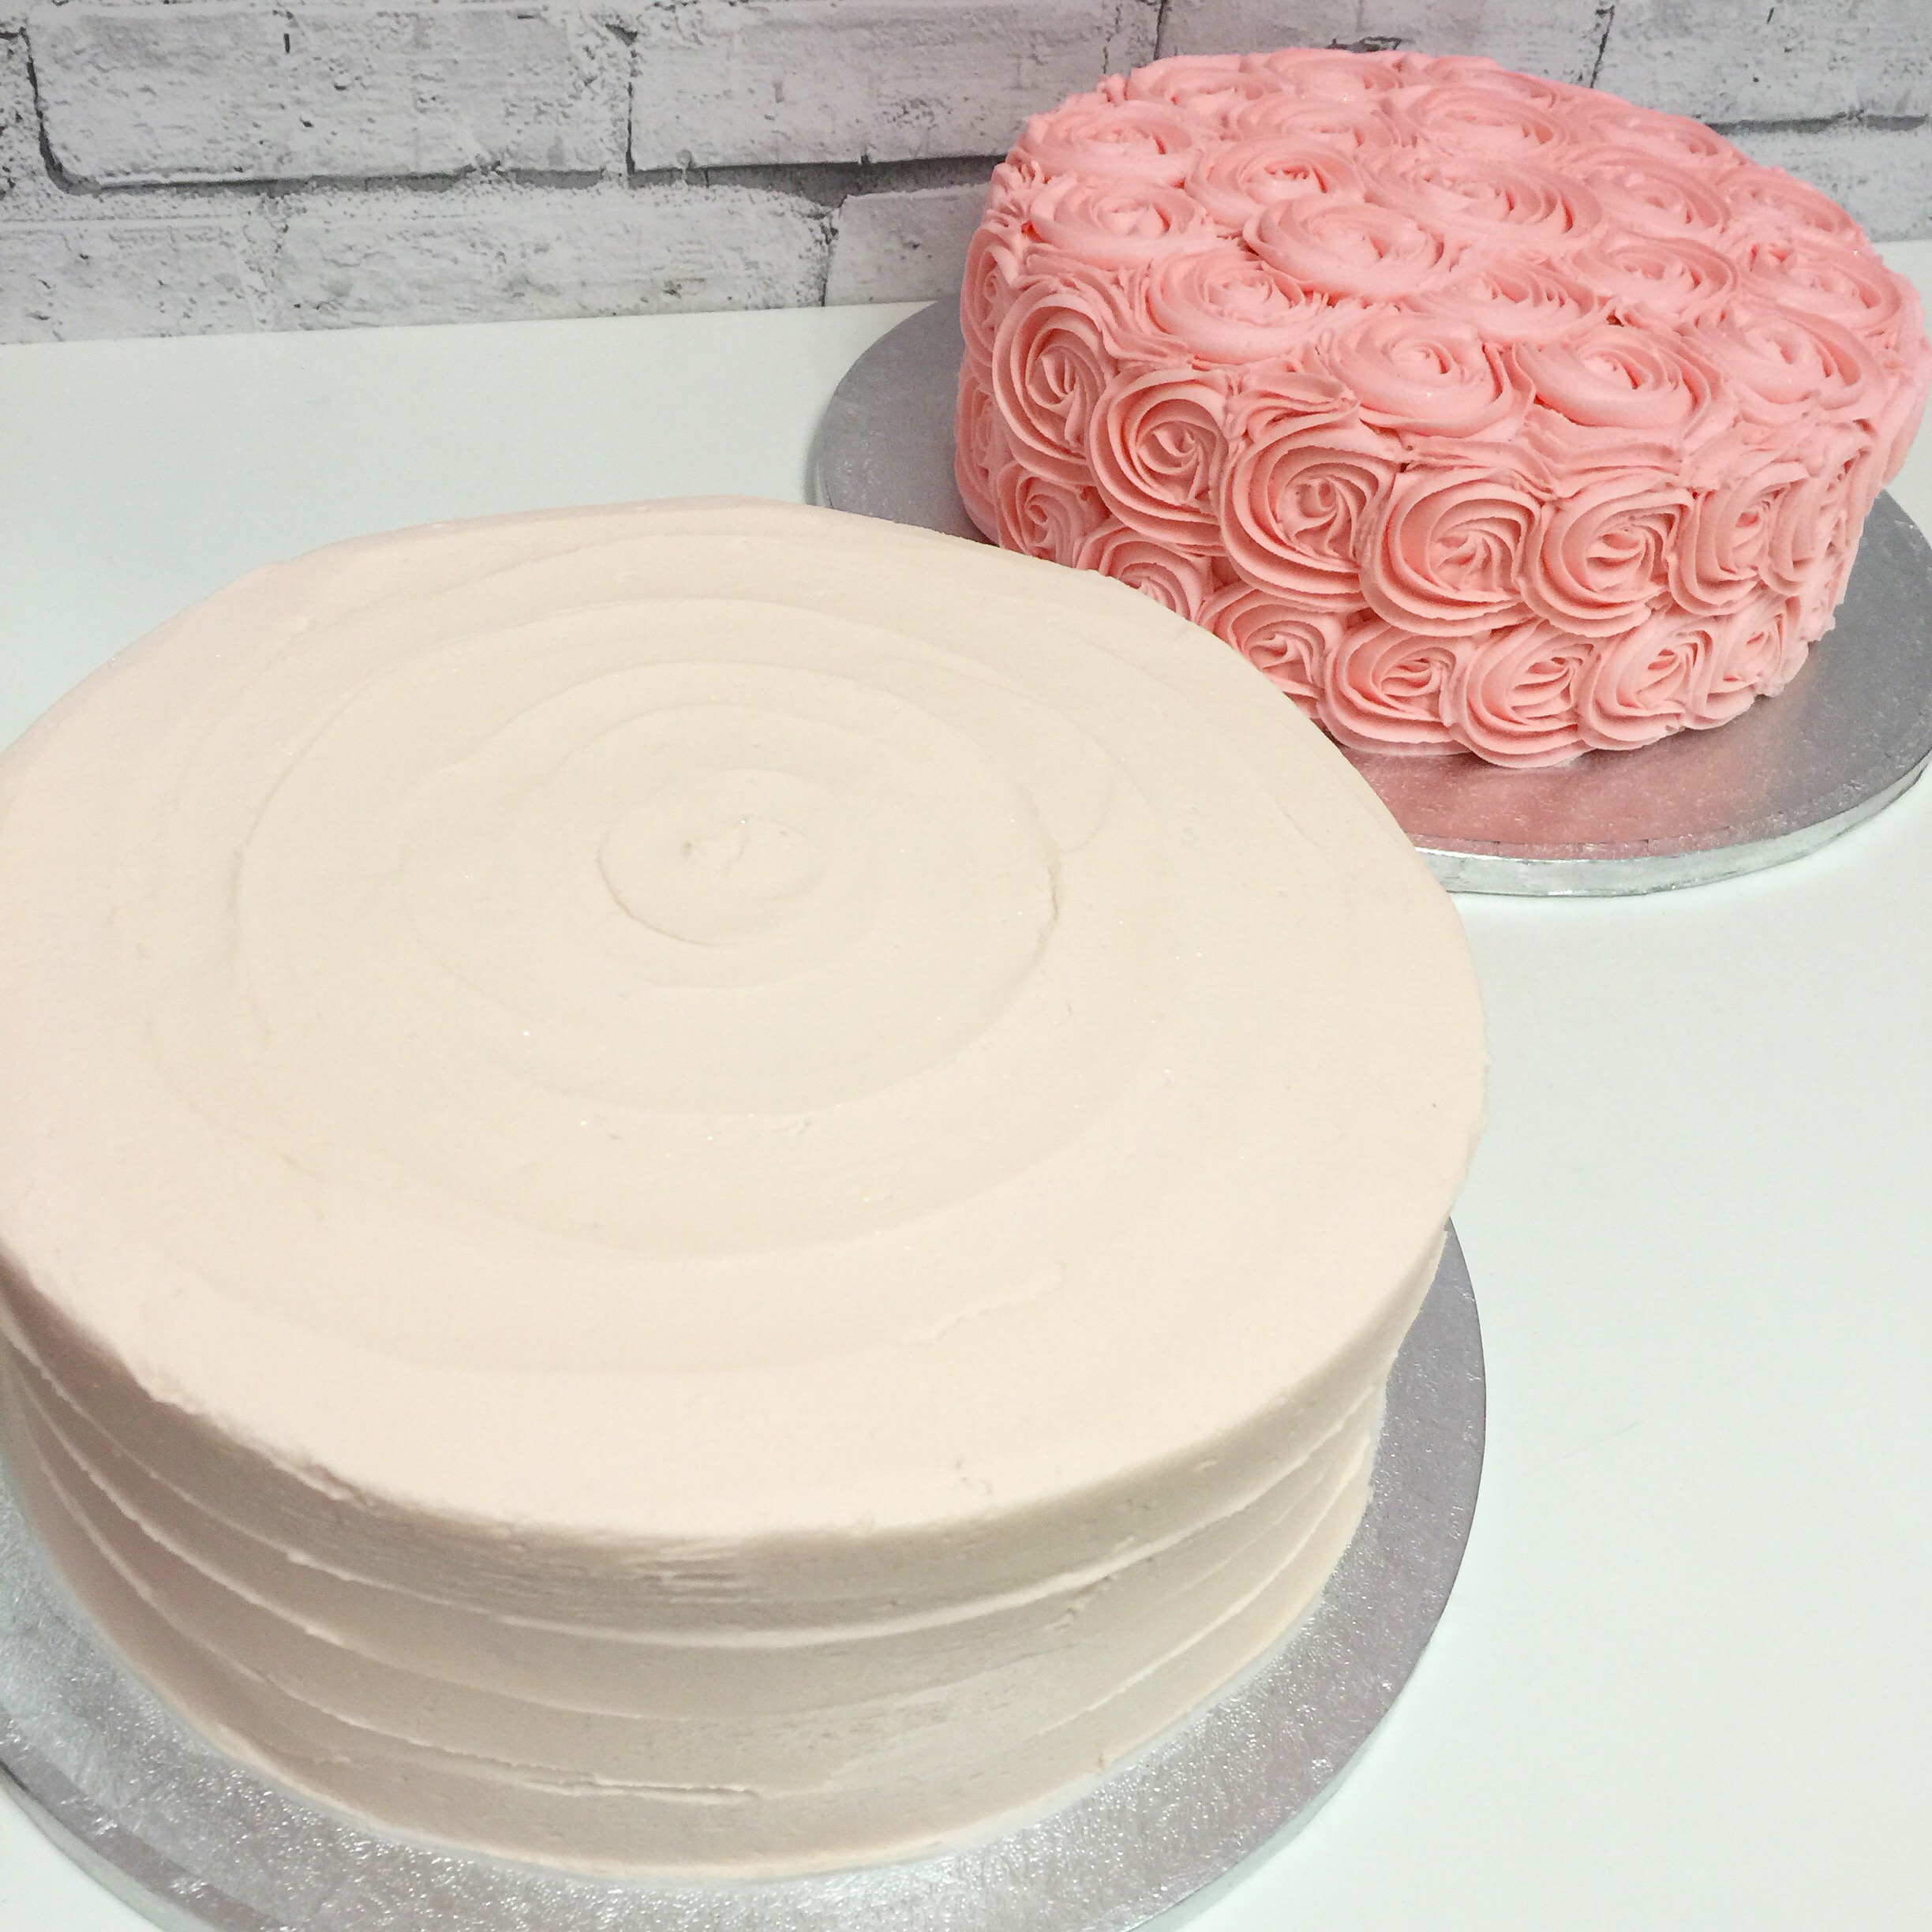 10 inch Layer Cakes ready for toppers!